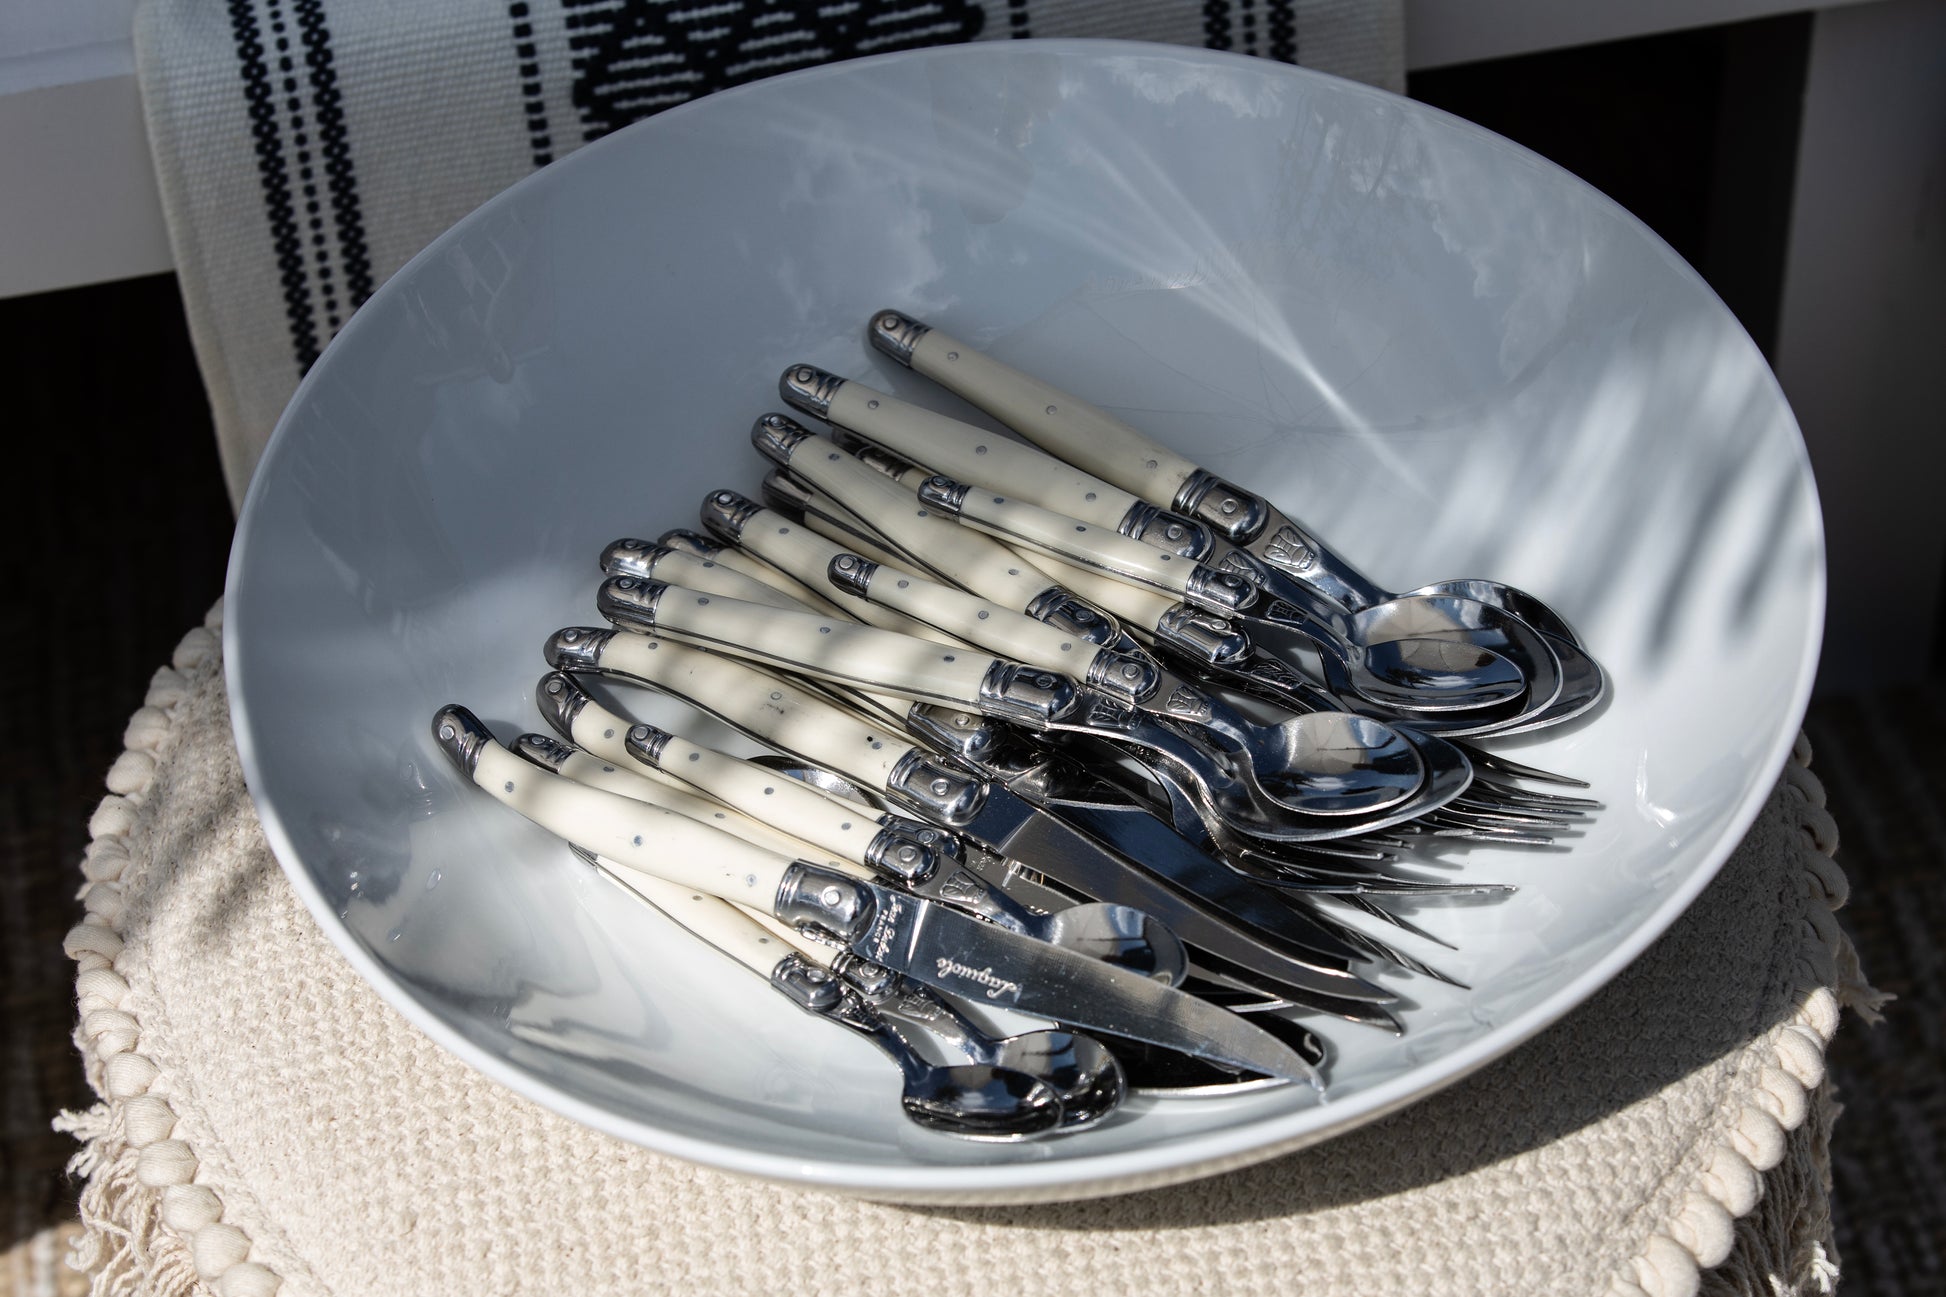 The 9 Best Gold Flatware Sets of 2023